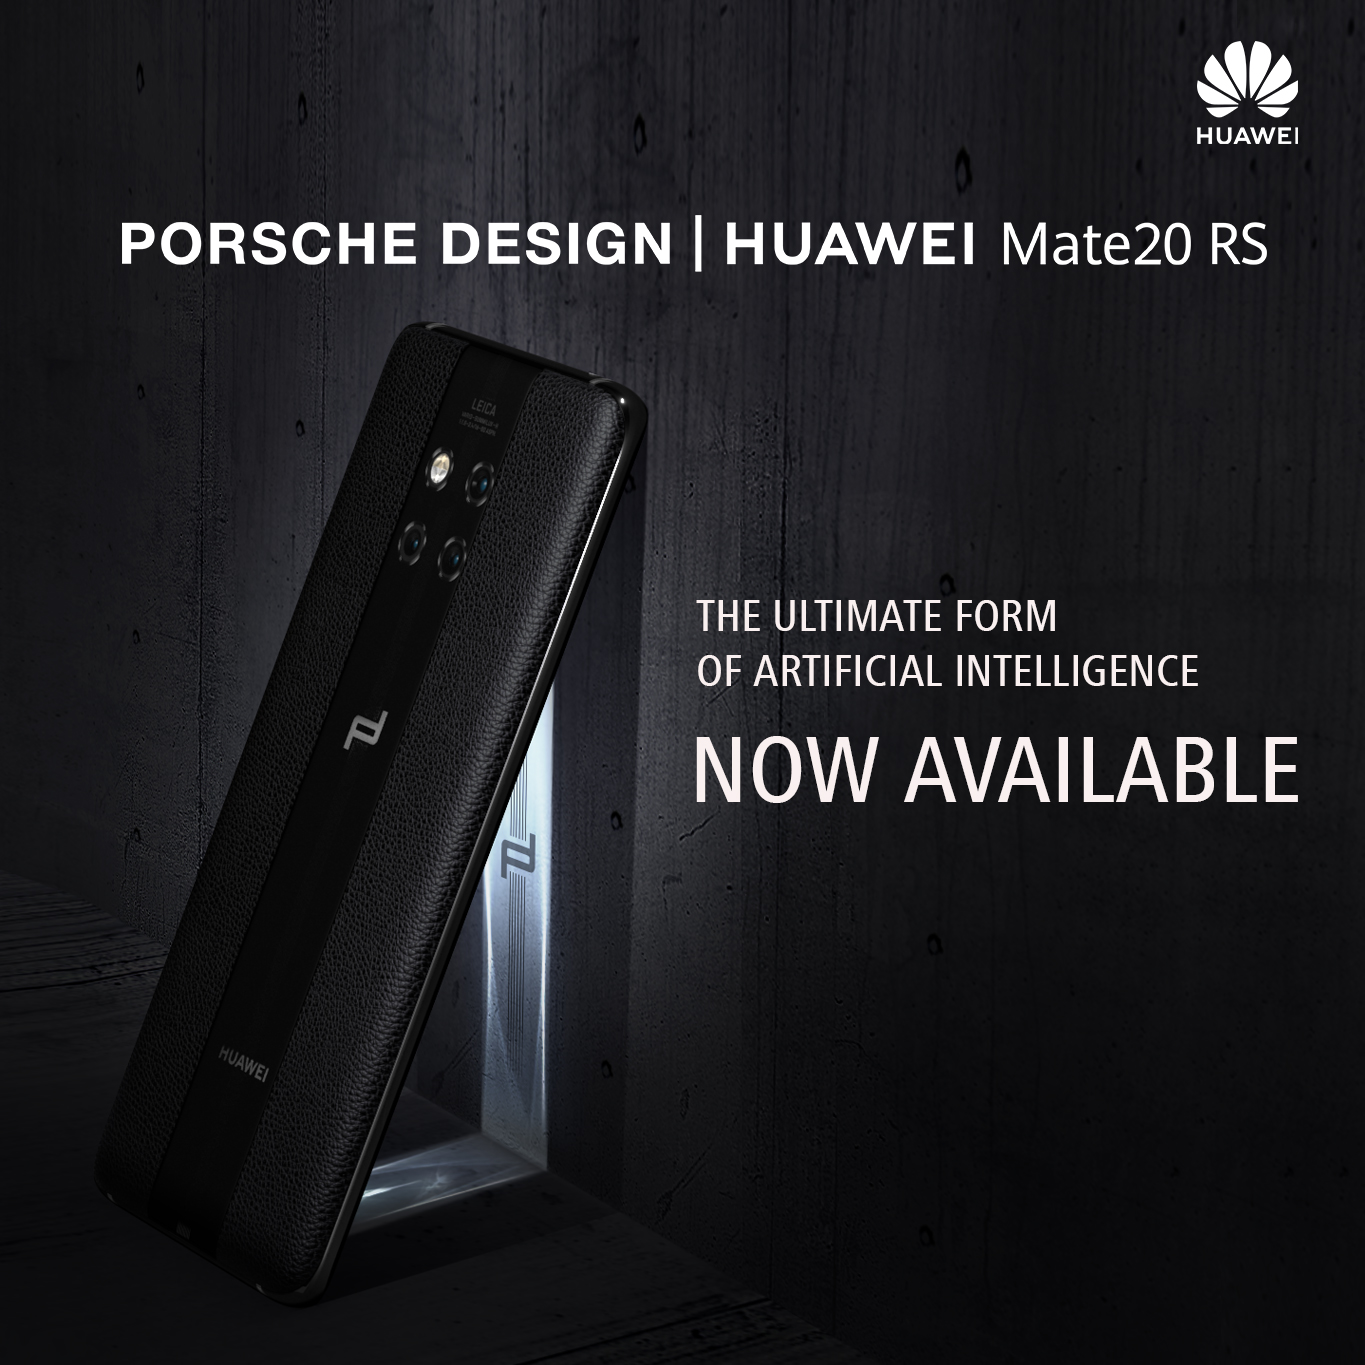 Huawei Mate 20 RS Porsche Design will be Available in PH Starting February 9!